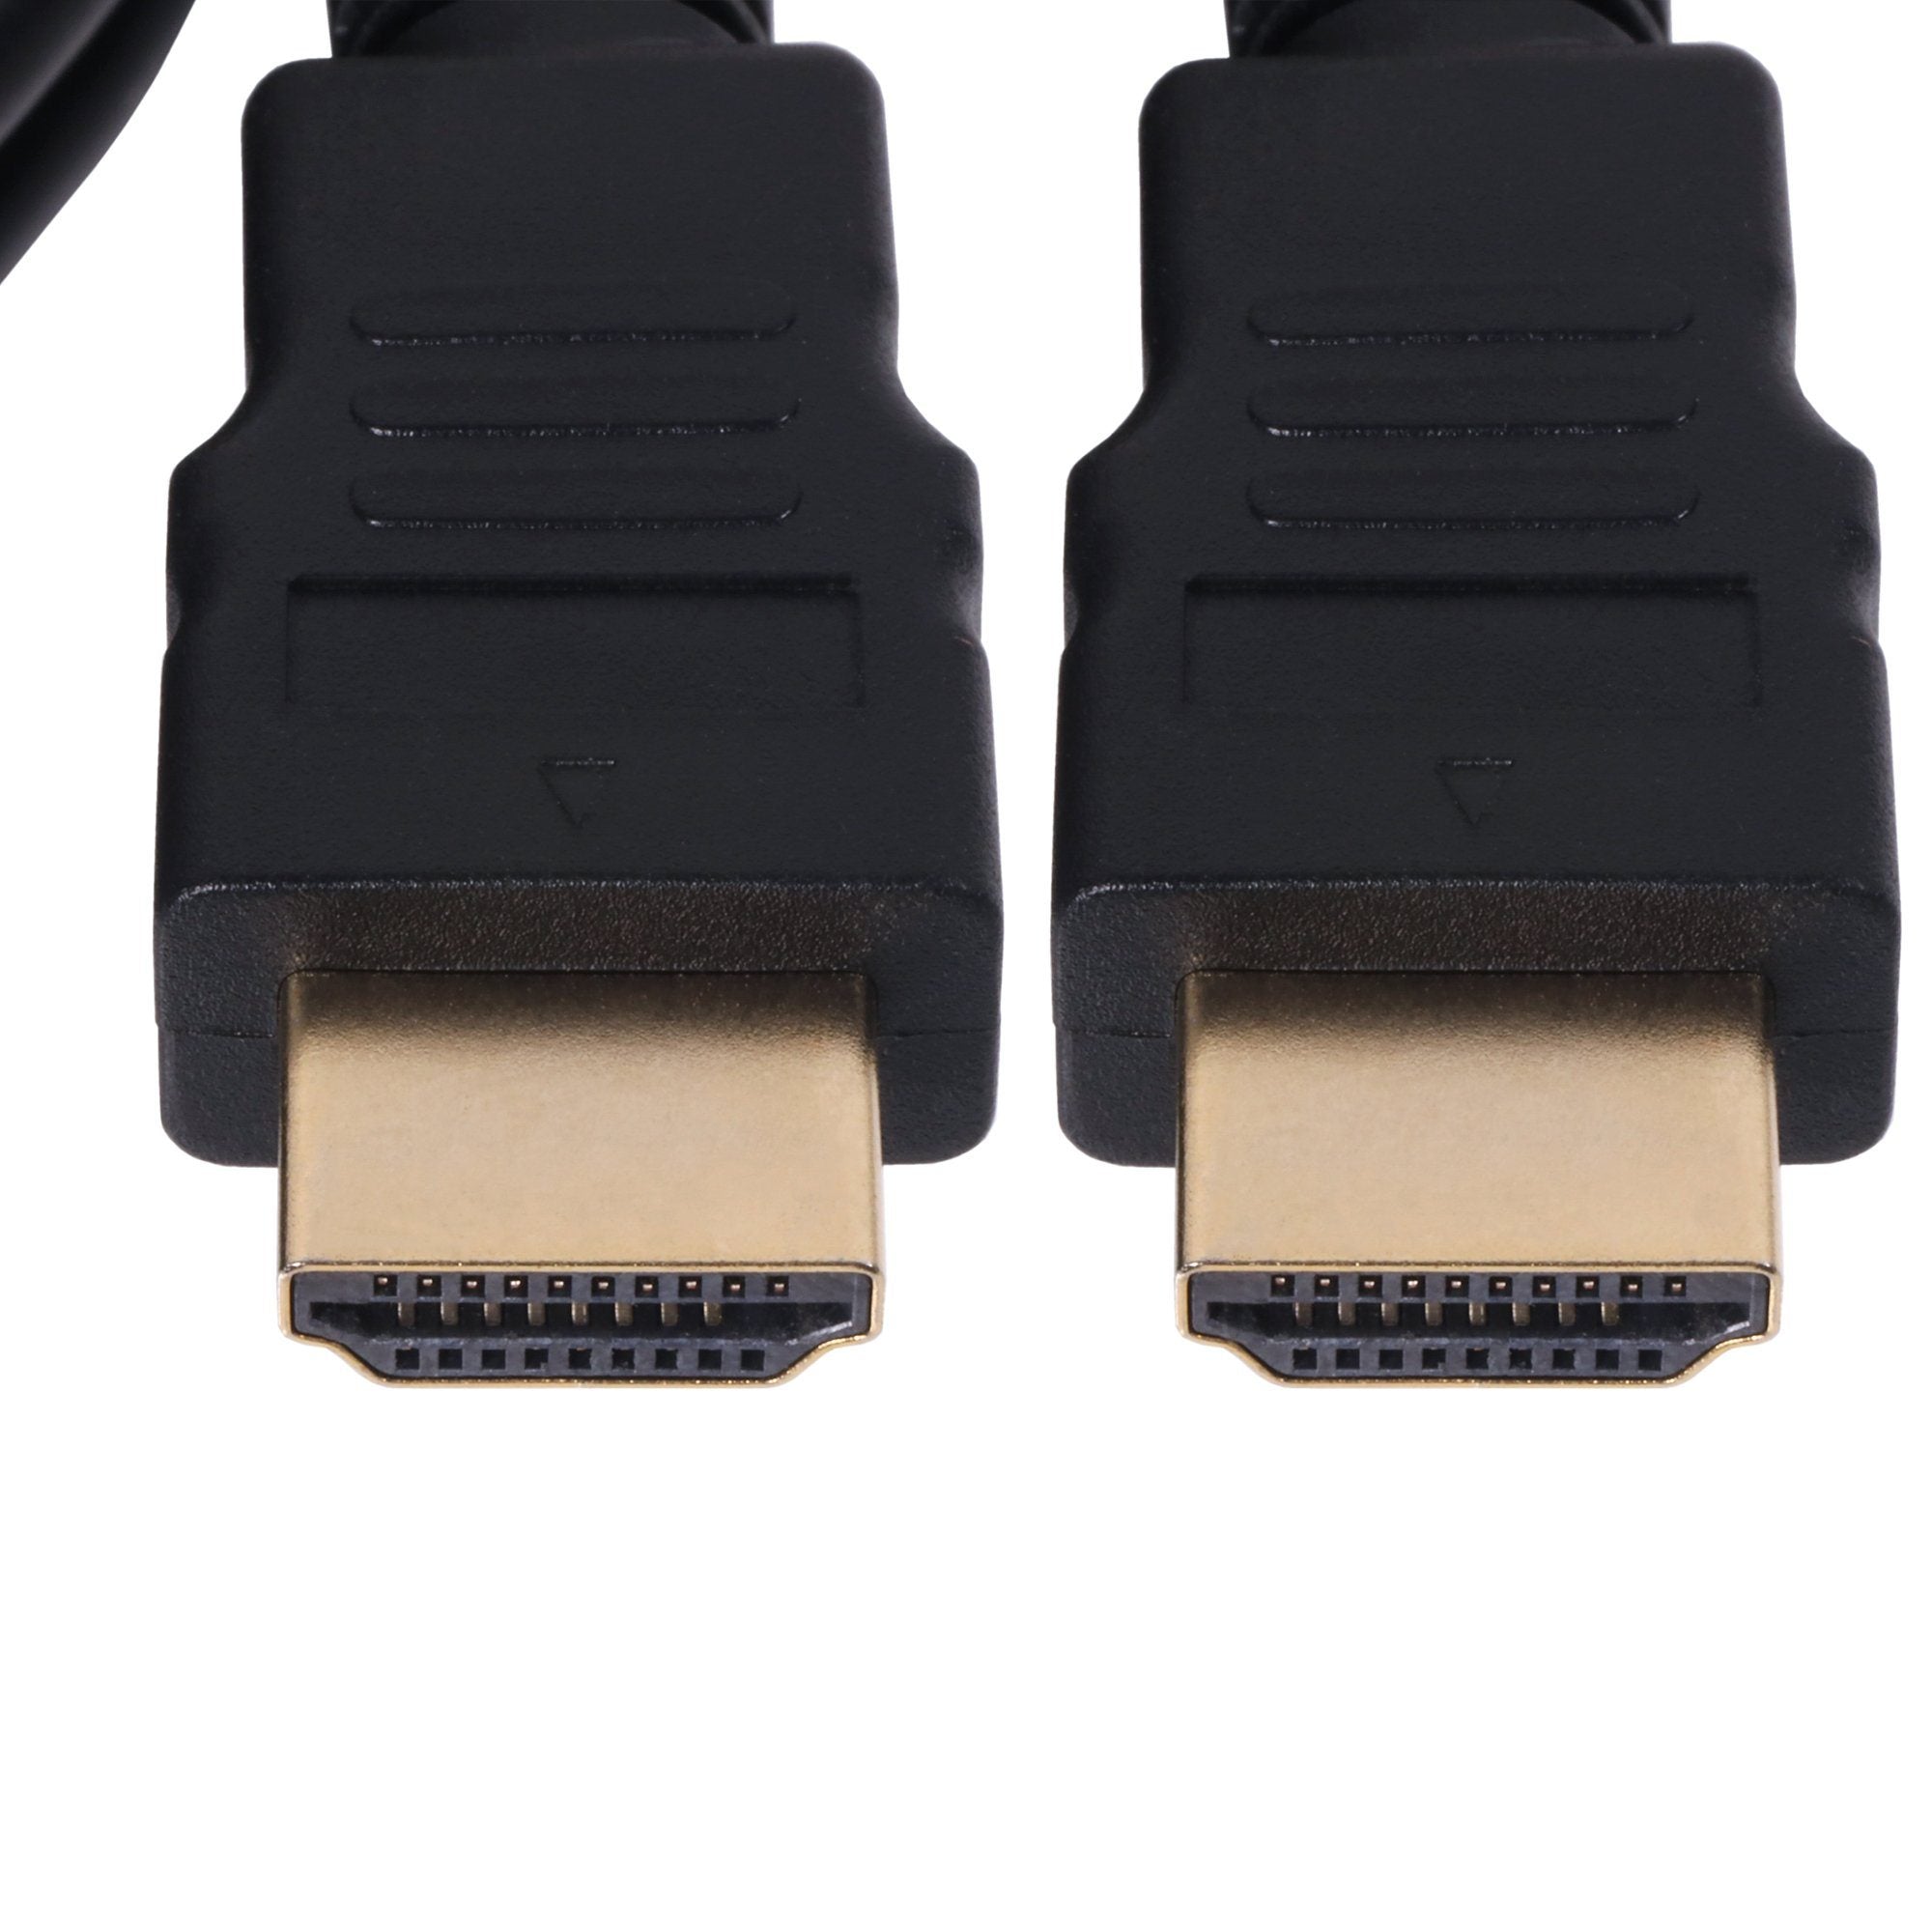 3 ft HDMI Video Cable - 30AWG Full-size HDMI (Type A) to HDMI (Type A)